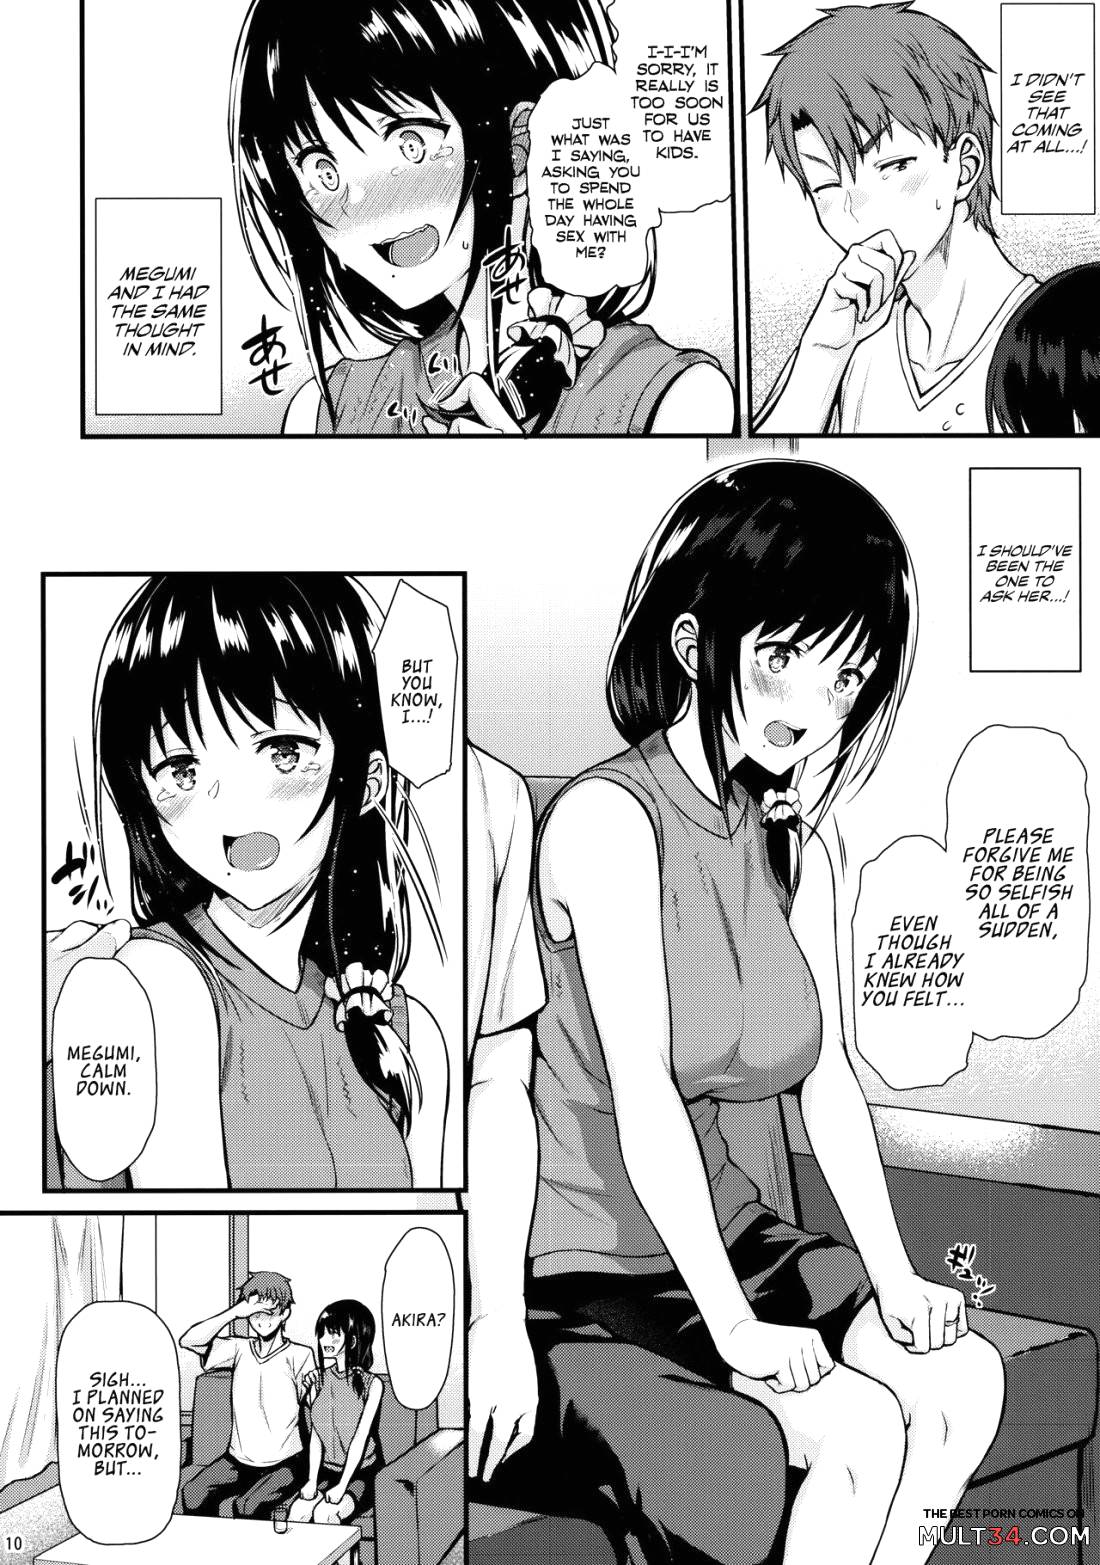 Baby making sex with Megumi page 9